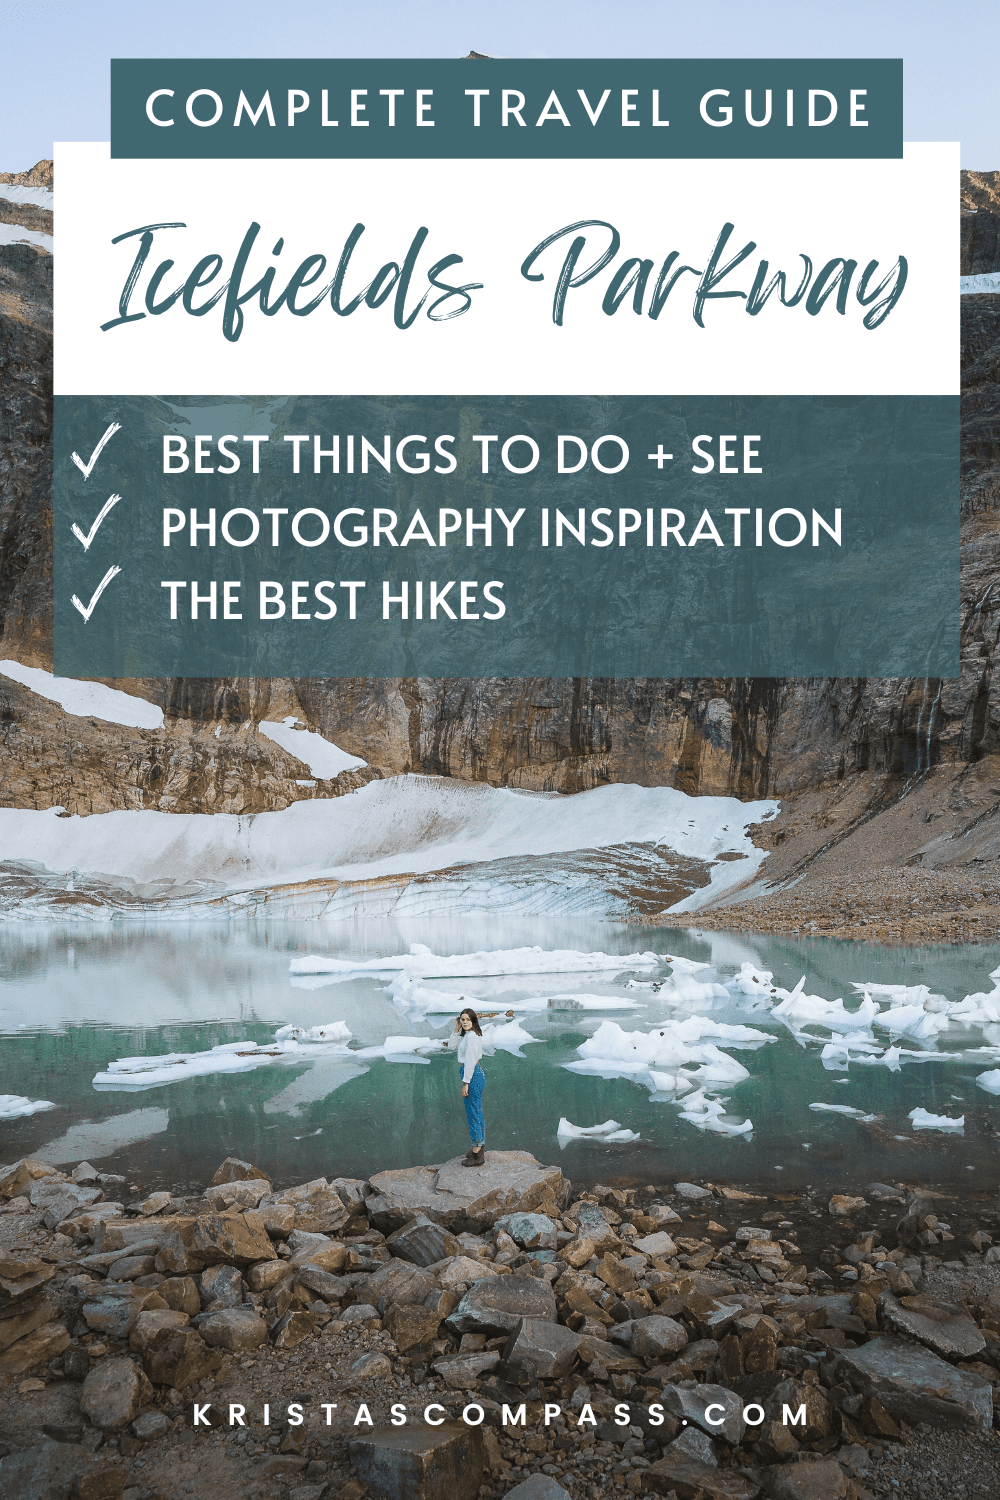 Bucket List Destinations on the Icefields Parkway Road trip guide - Canadian Rockies Travel Guide